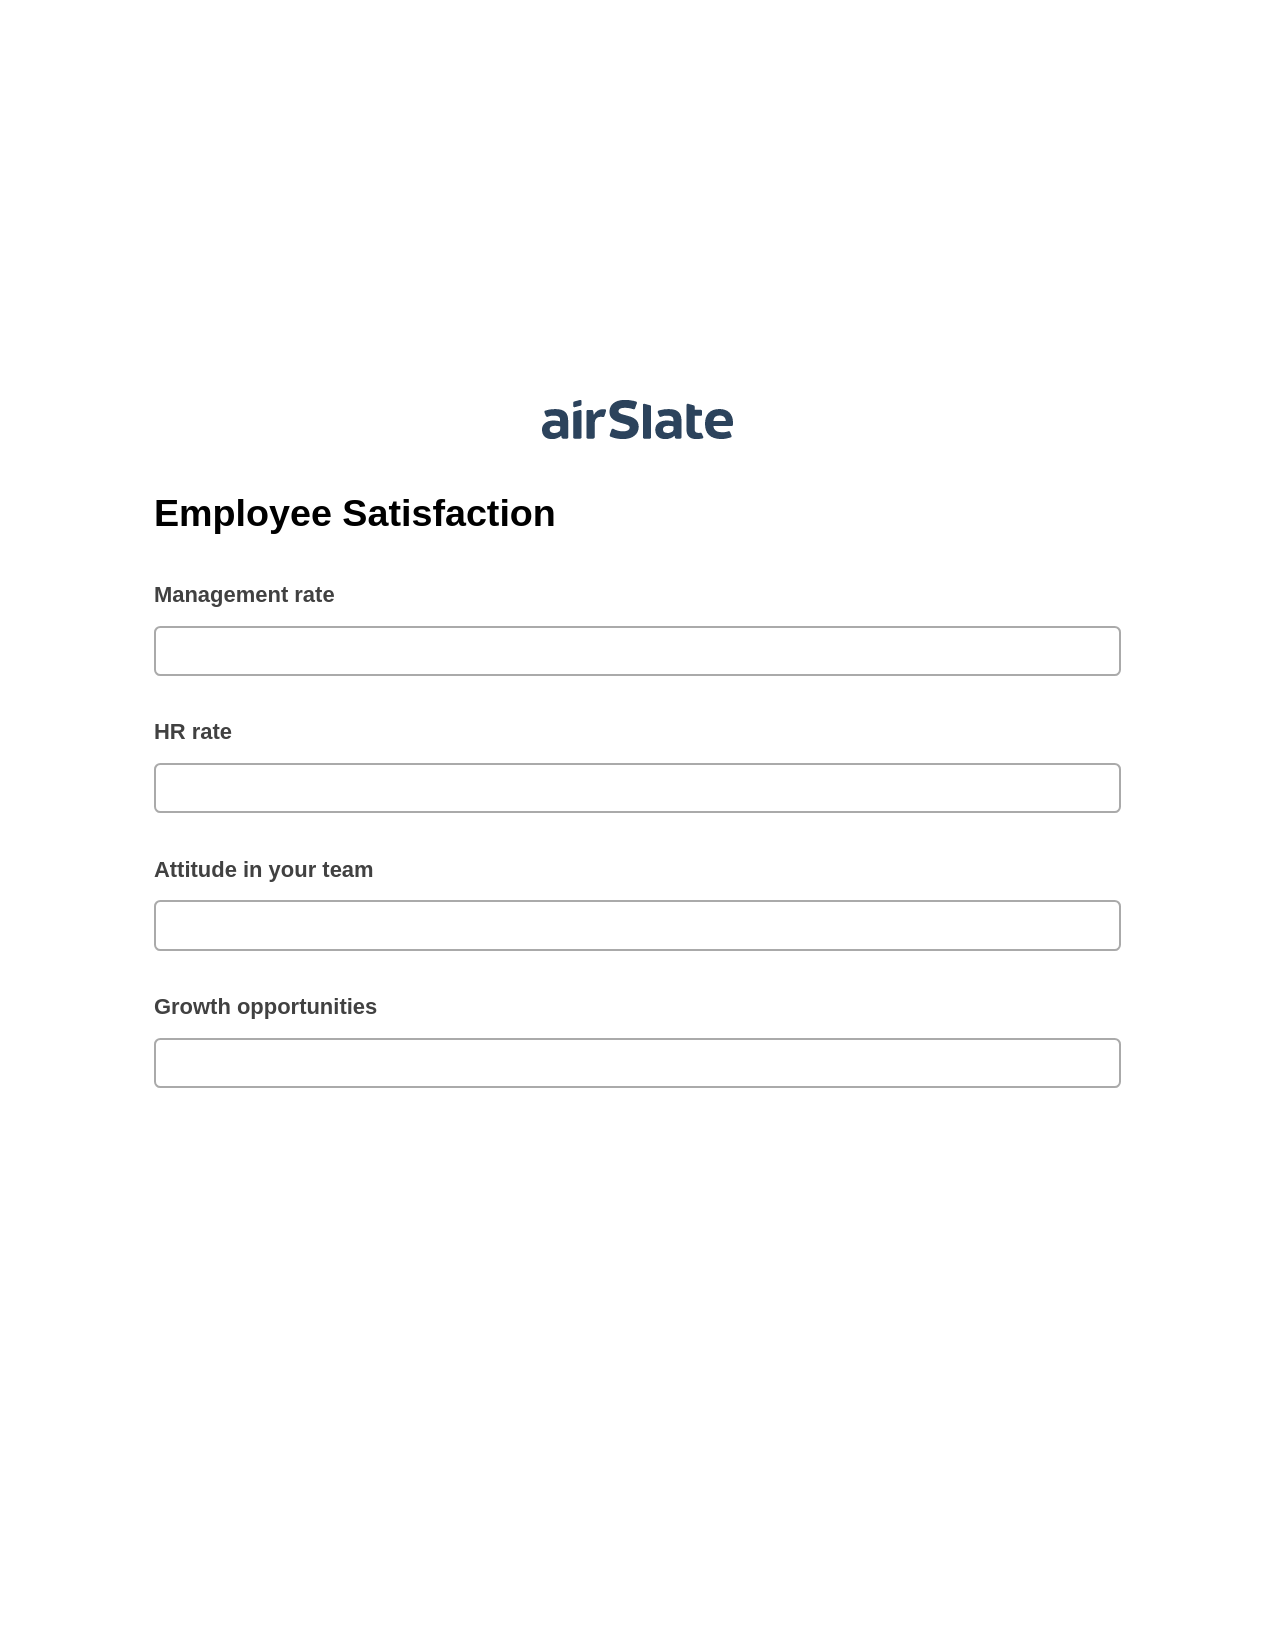 Employee Satisfaction Pre-fill from Excel Spreadsheet Bot, Hide Signatures Bot, Archive to SharePoint Folder Bot